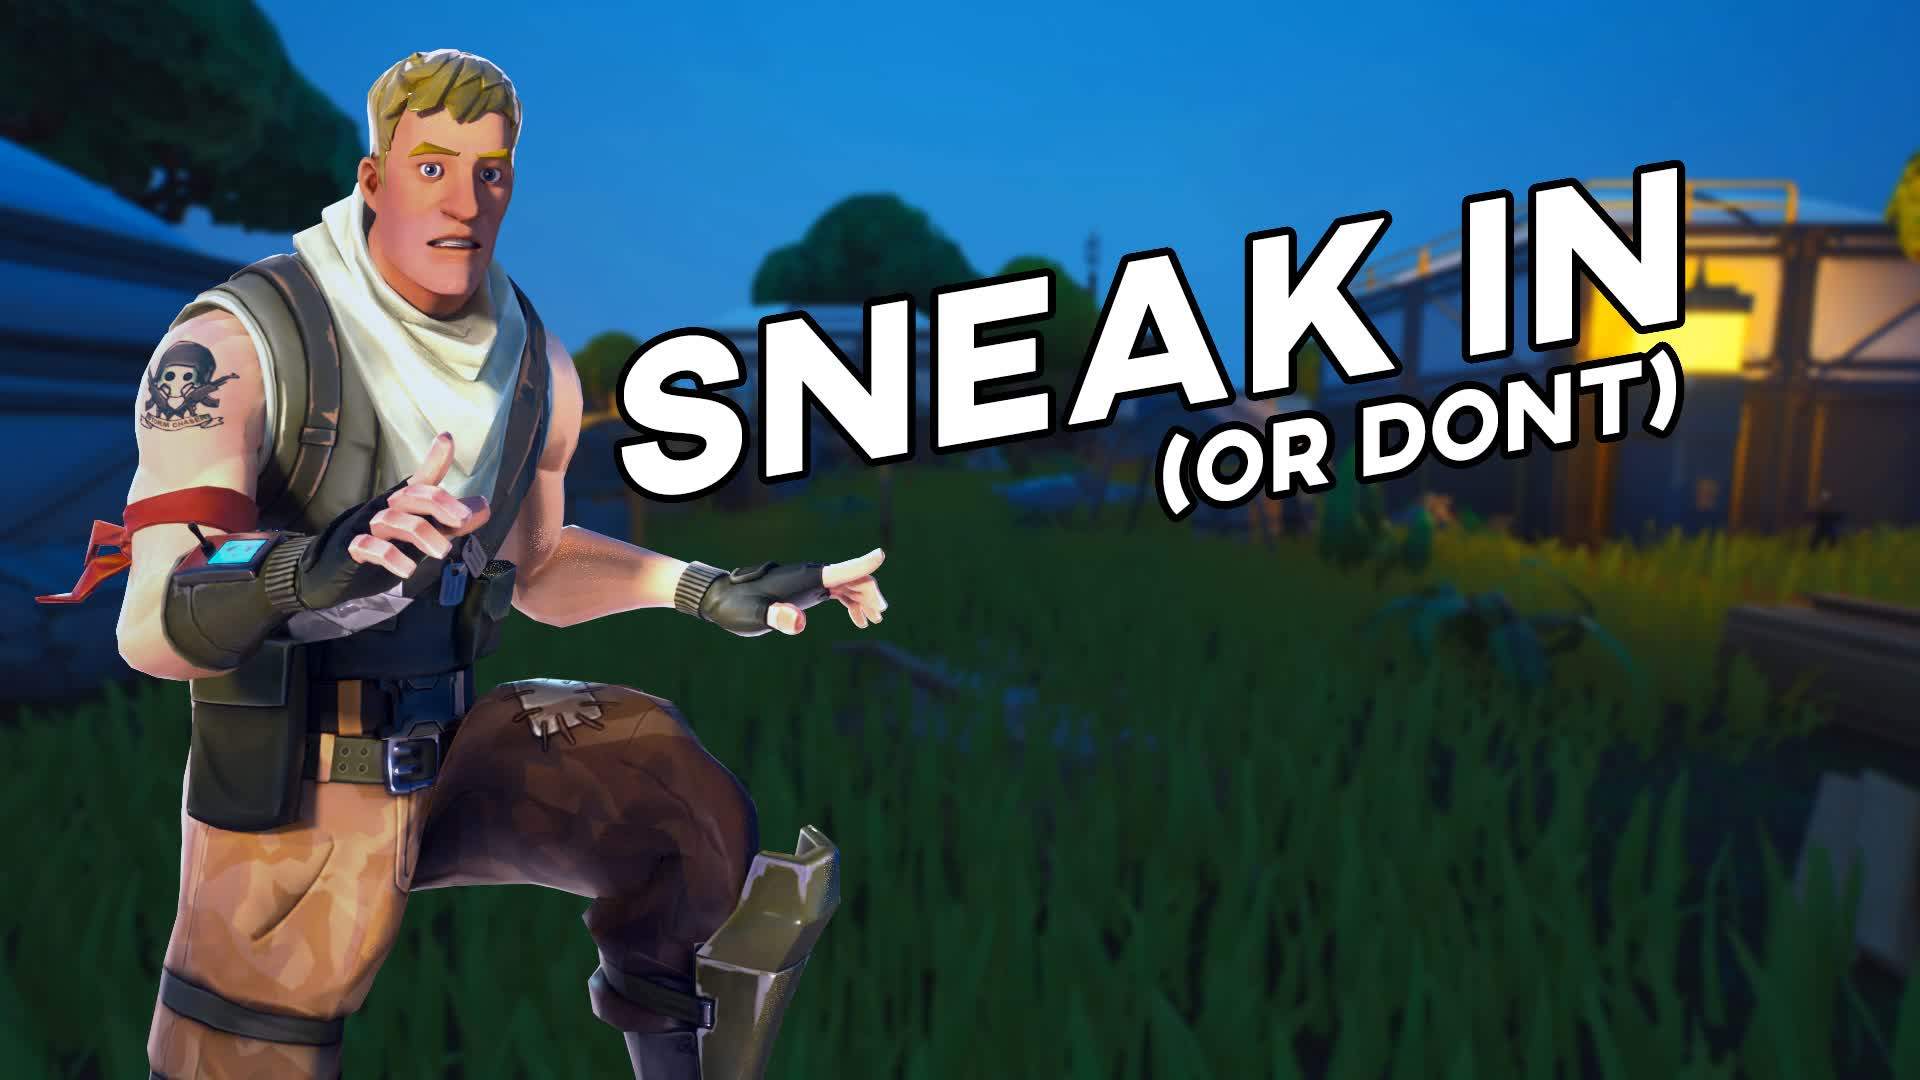 SNEAK IN (OR DONT)